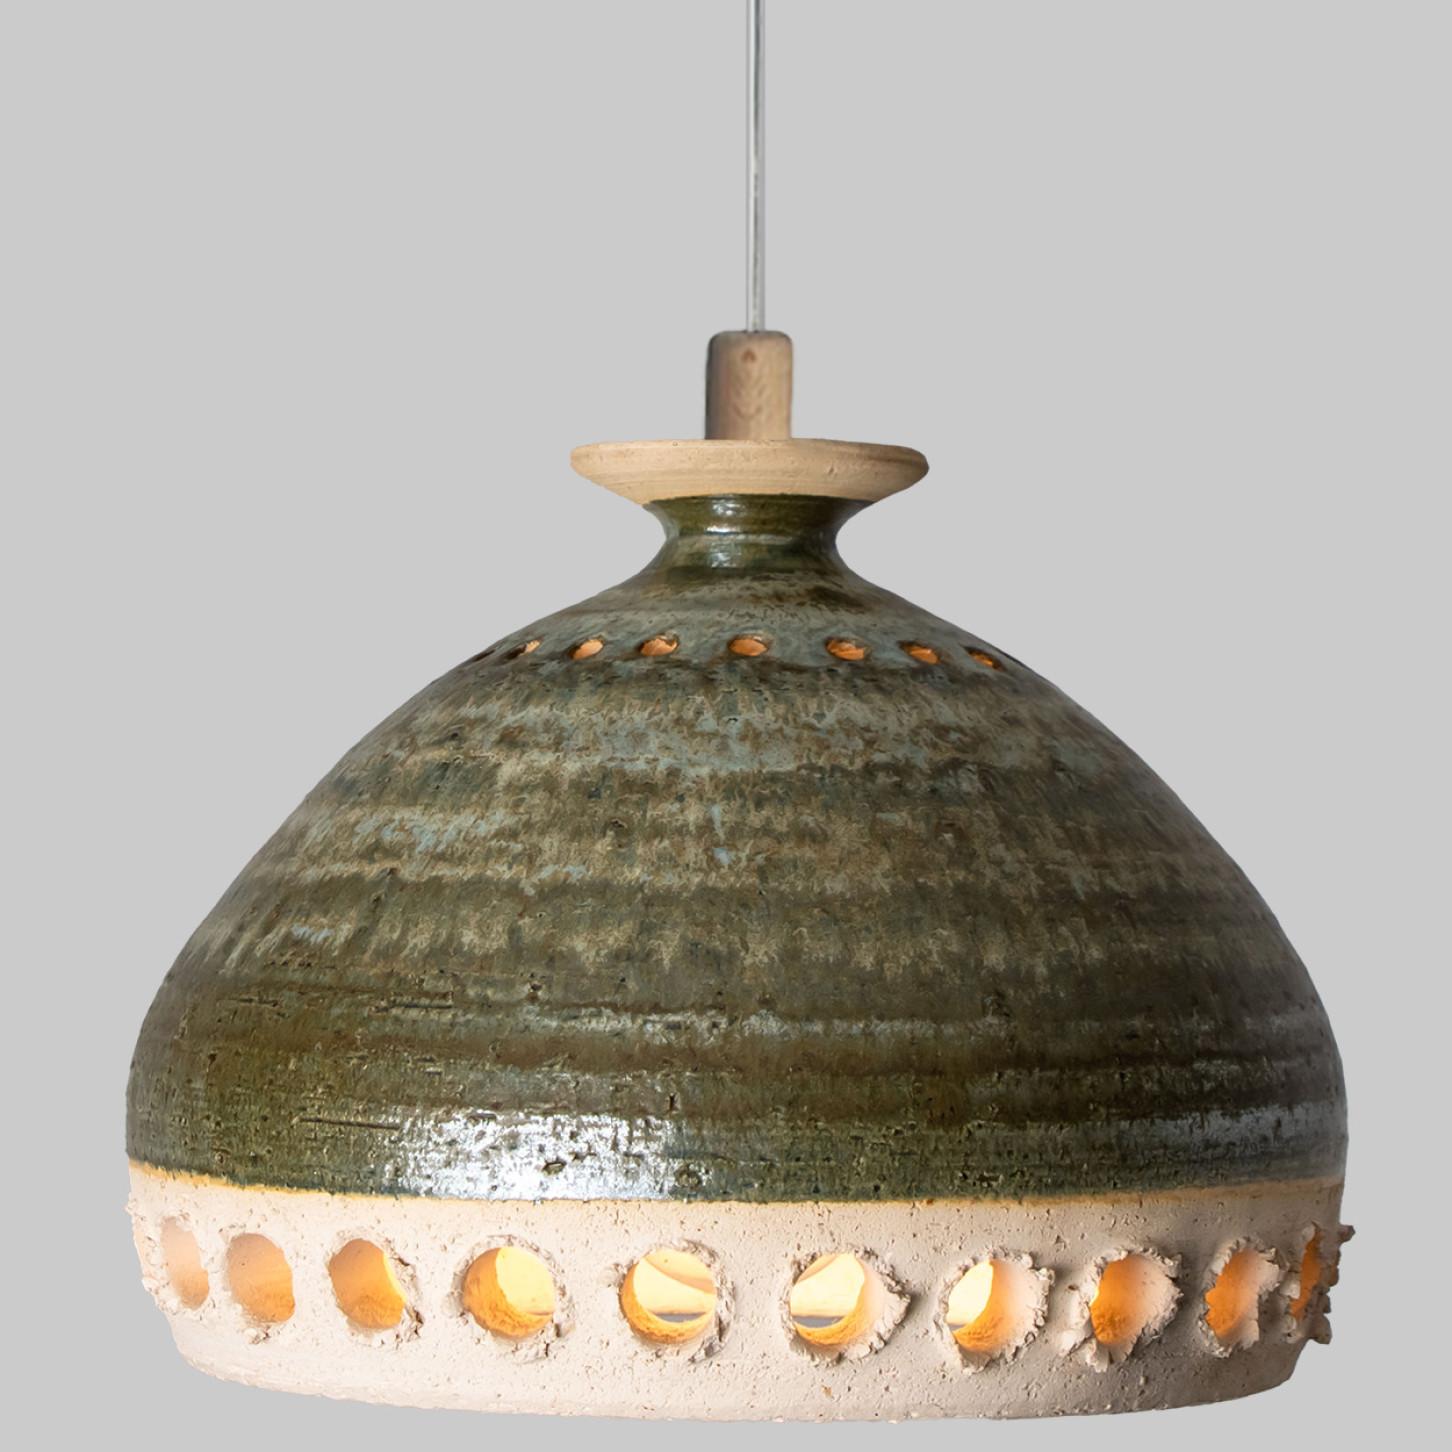 Stunning round hanging lamp with an unusual shape, made with rich green colored ceramics, manufactured in the 1970s in Denmark. We also have a multitude of unique colored ceramic light sets and arrangements, all available on the frontstore.